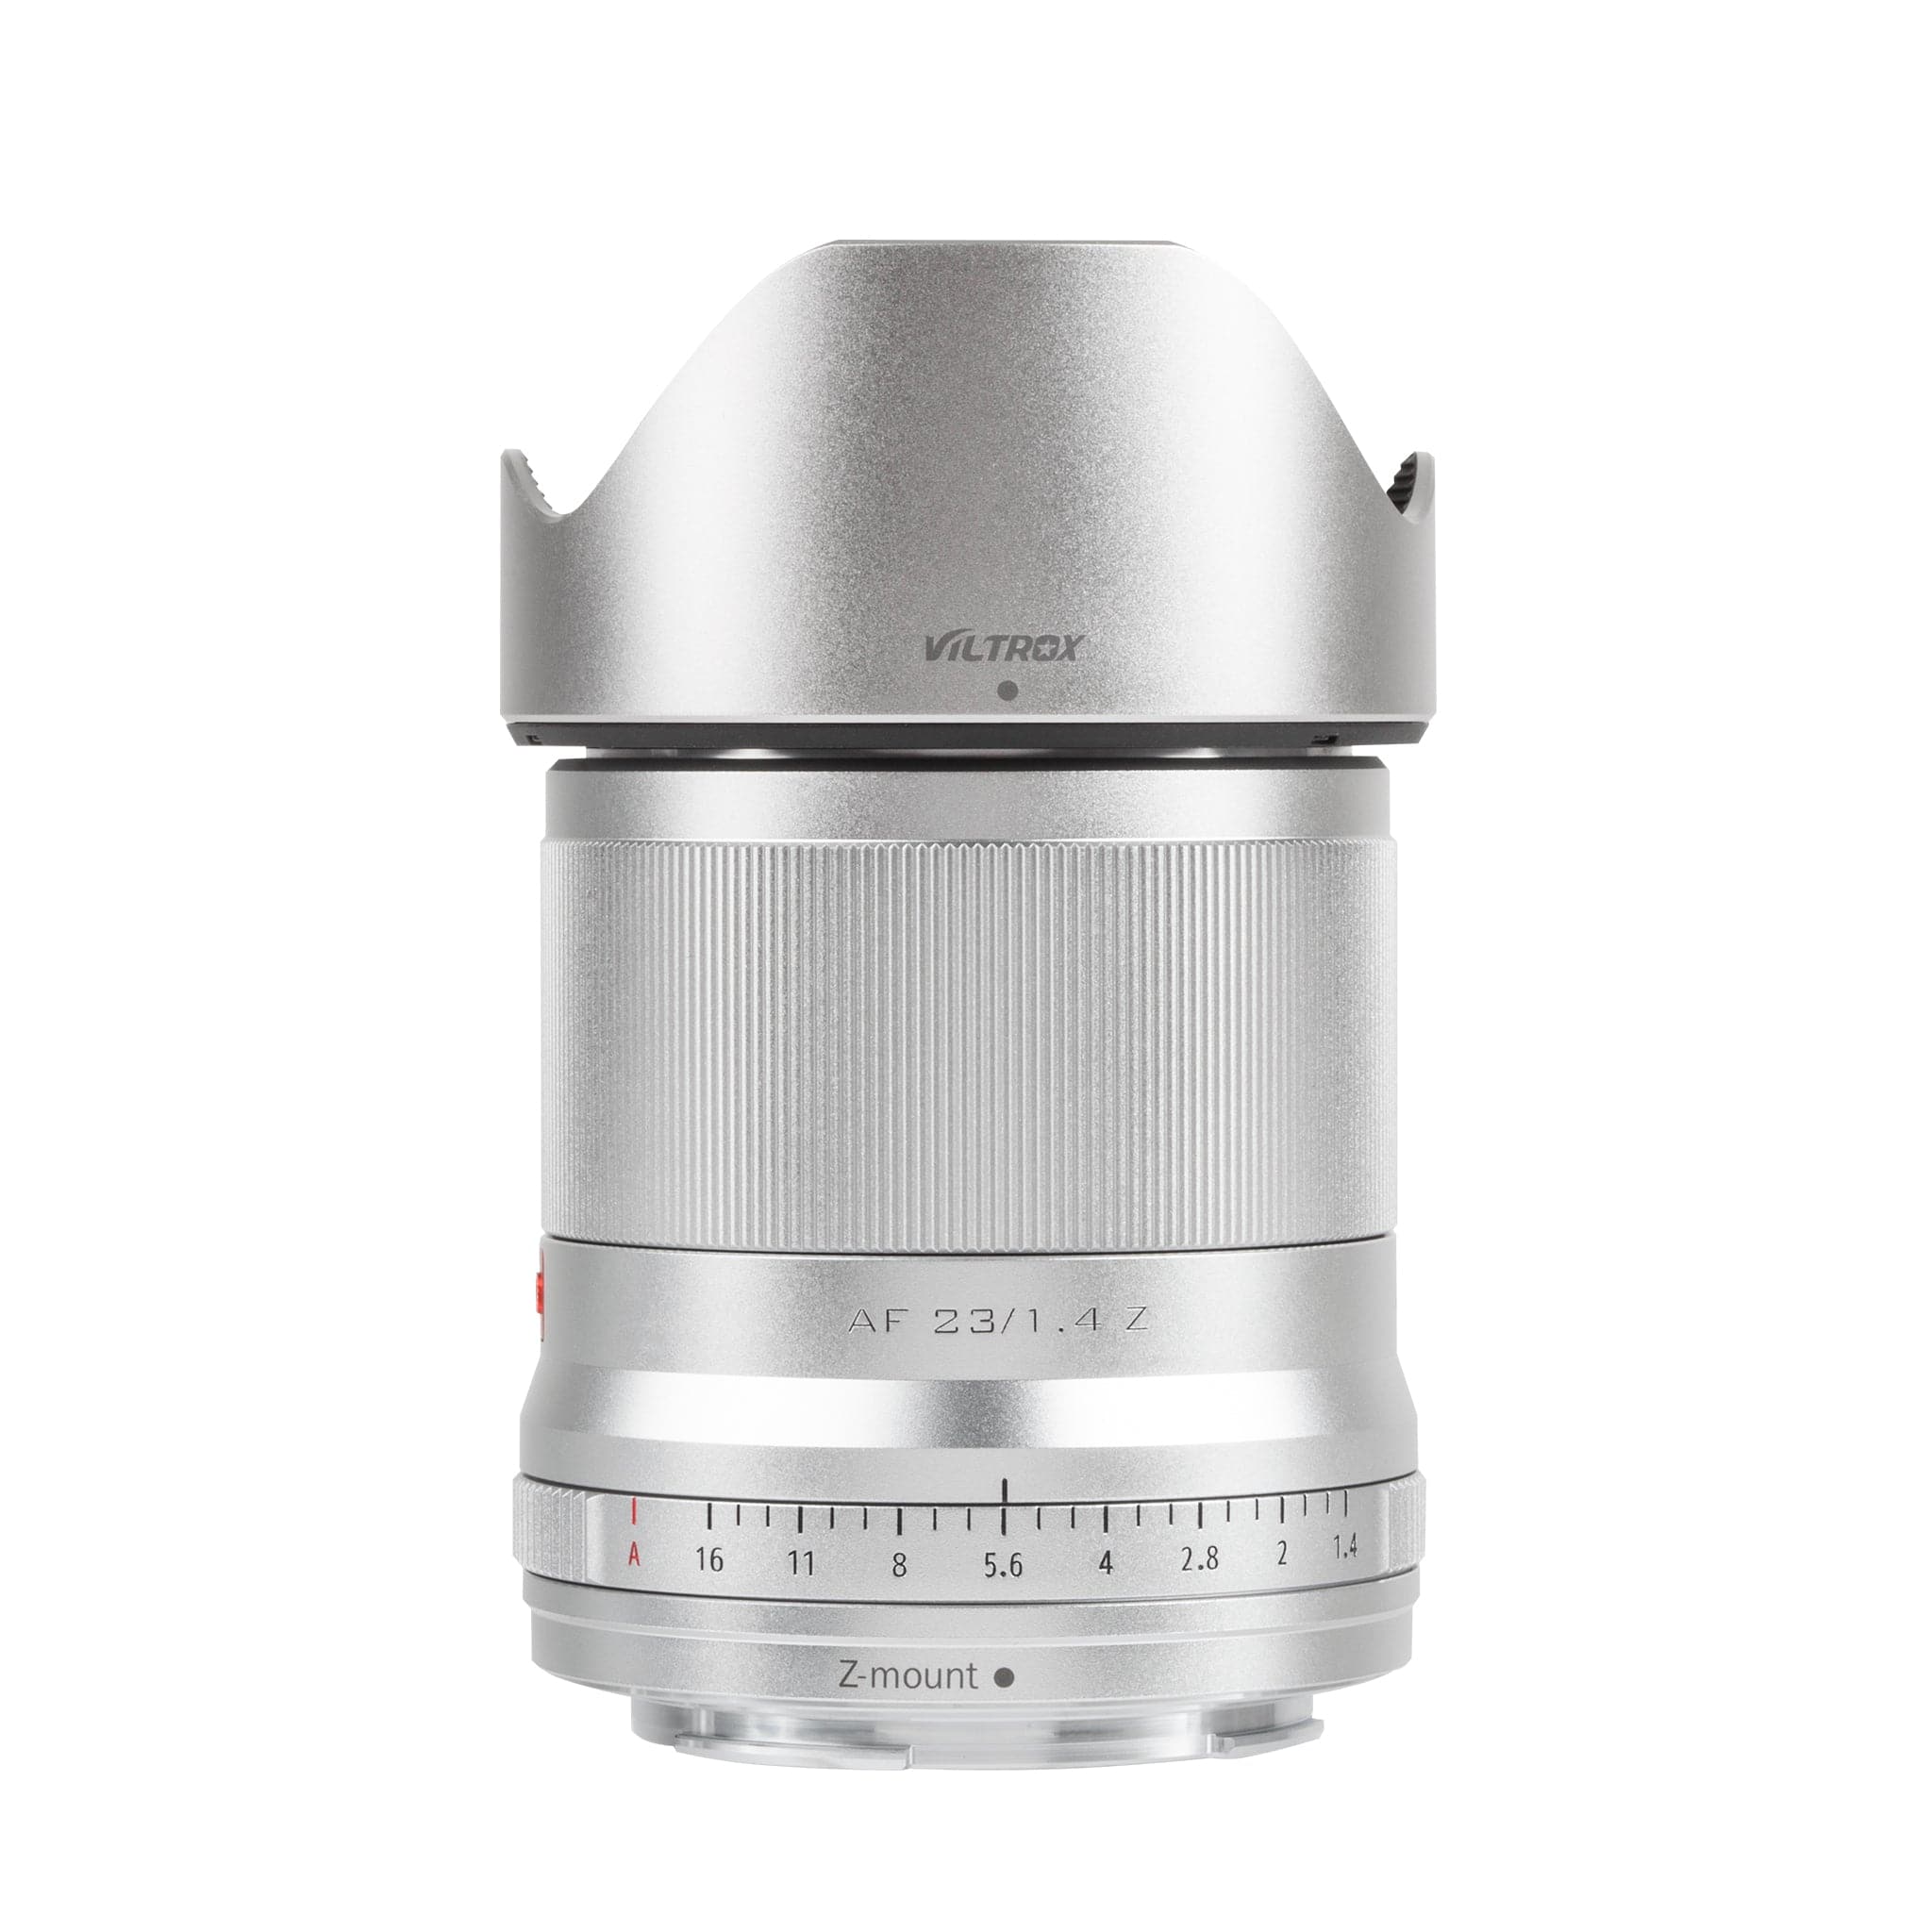 Viltrox Mirrorless Z-mount Silver Version 23mm/33mm/56mm F1.4 Auto Focus APS-C Prime Lens with STM Motor Support Eye-AF Suitable for the Nikon Zfc Model